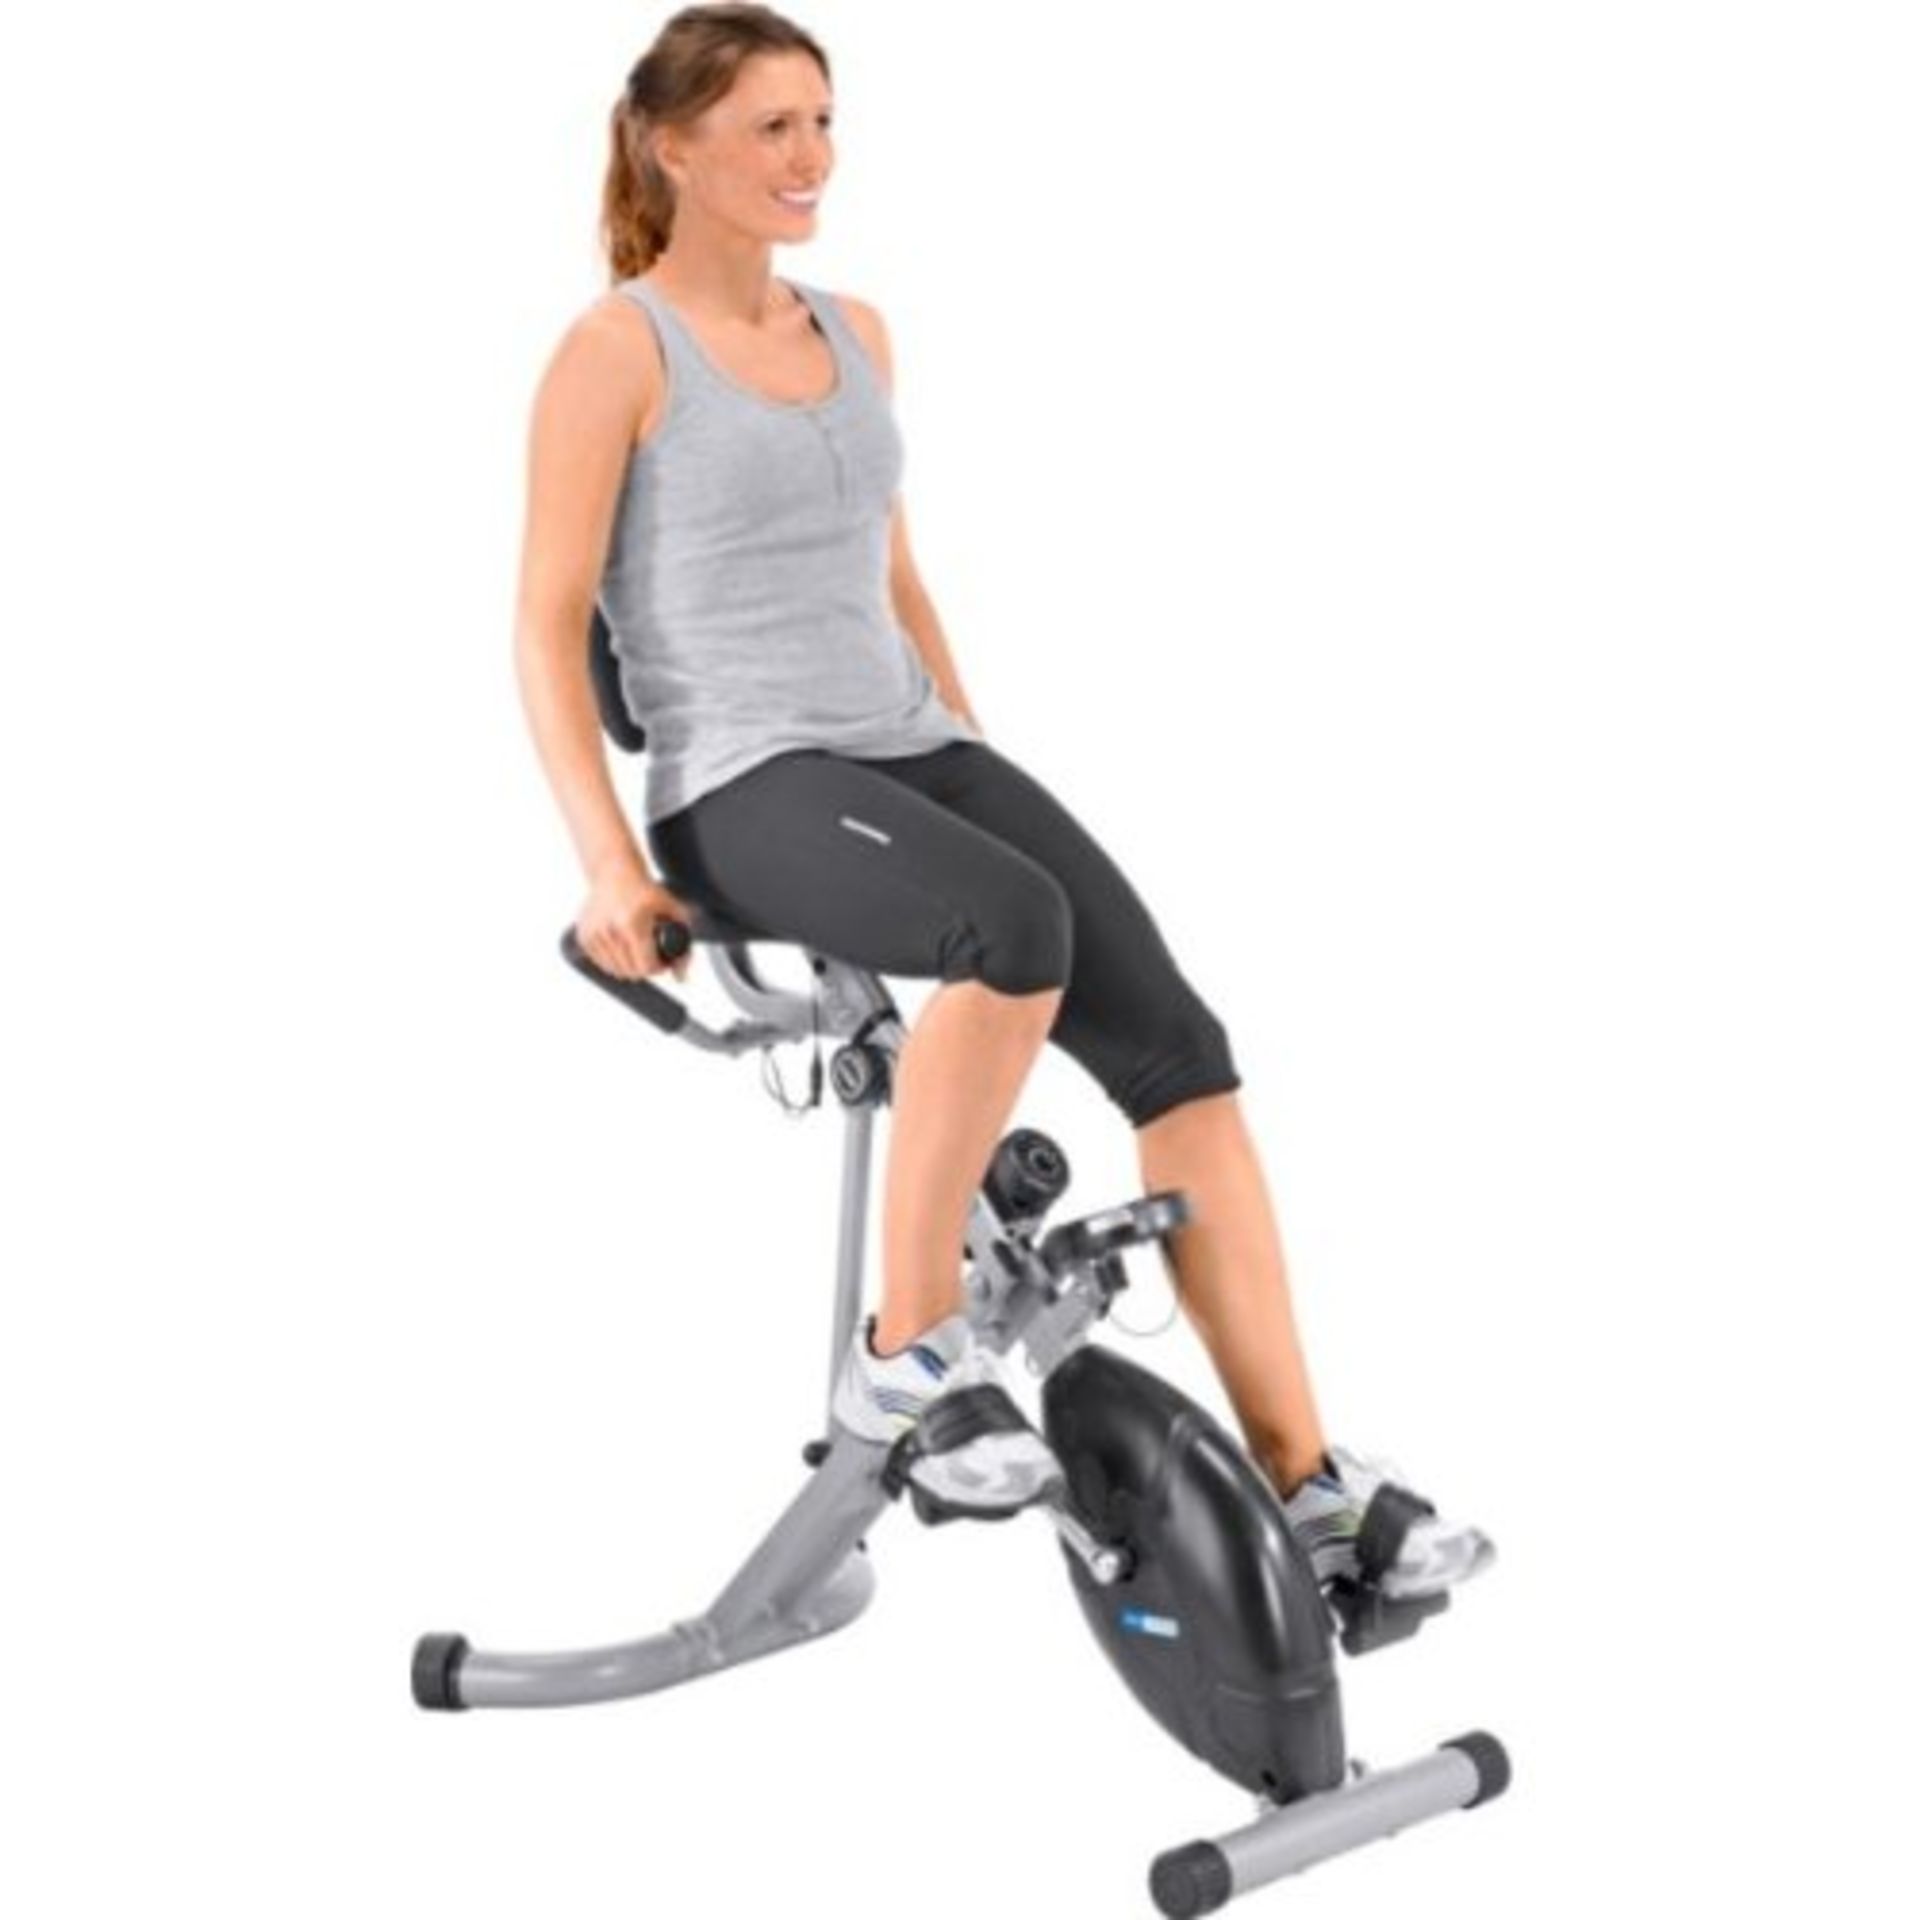 1 x Pro Fitness Recumbent Folding Exercise Bike - CL007 - Excellent Condition - Workout and Tone - Image 2 of 5